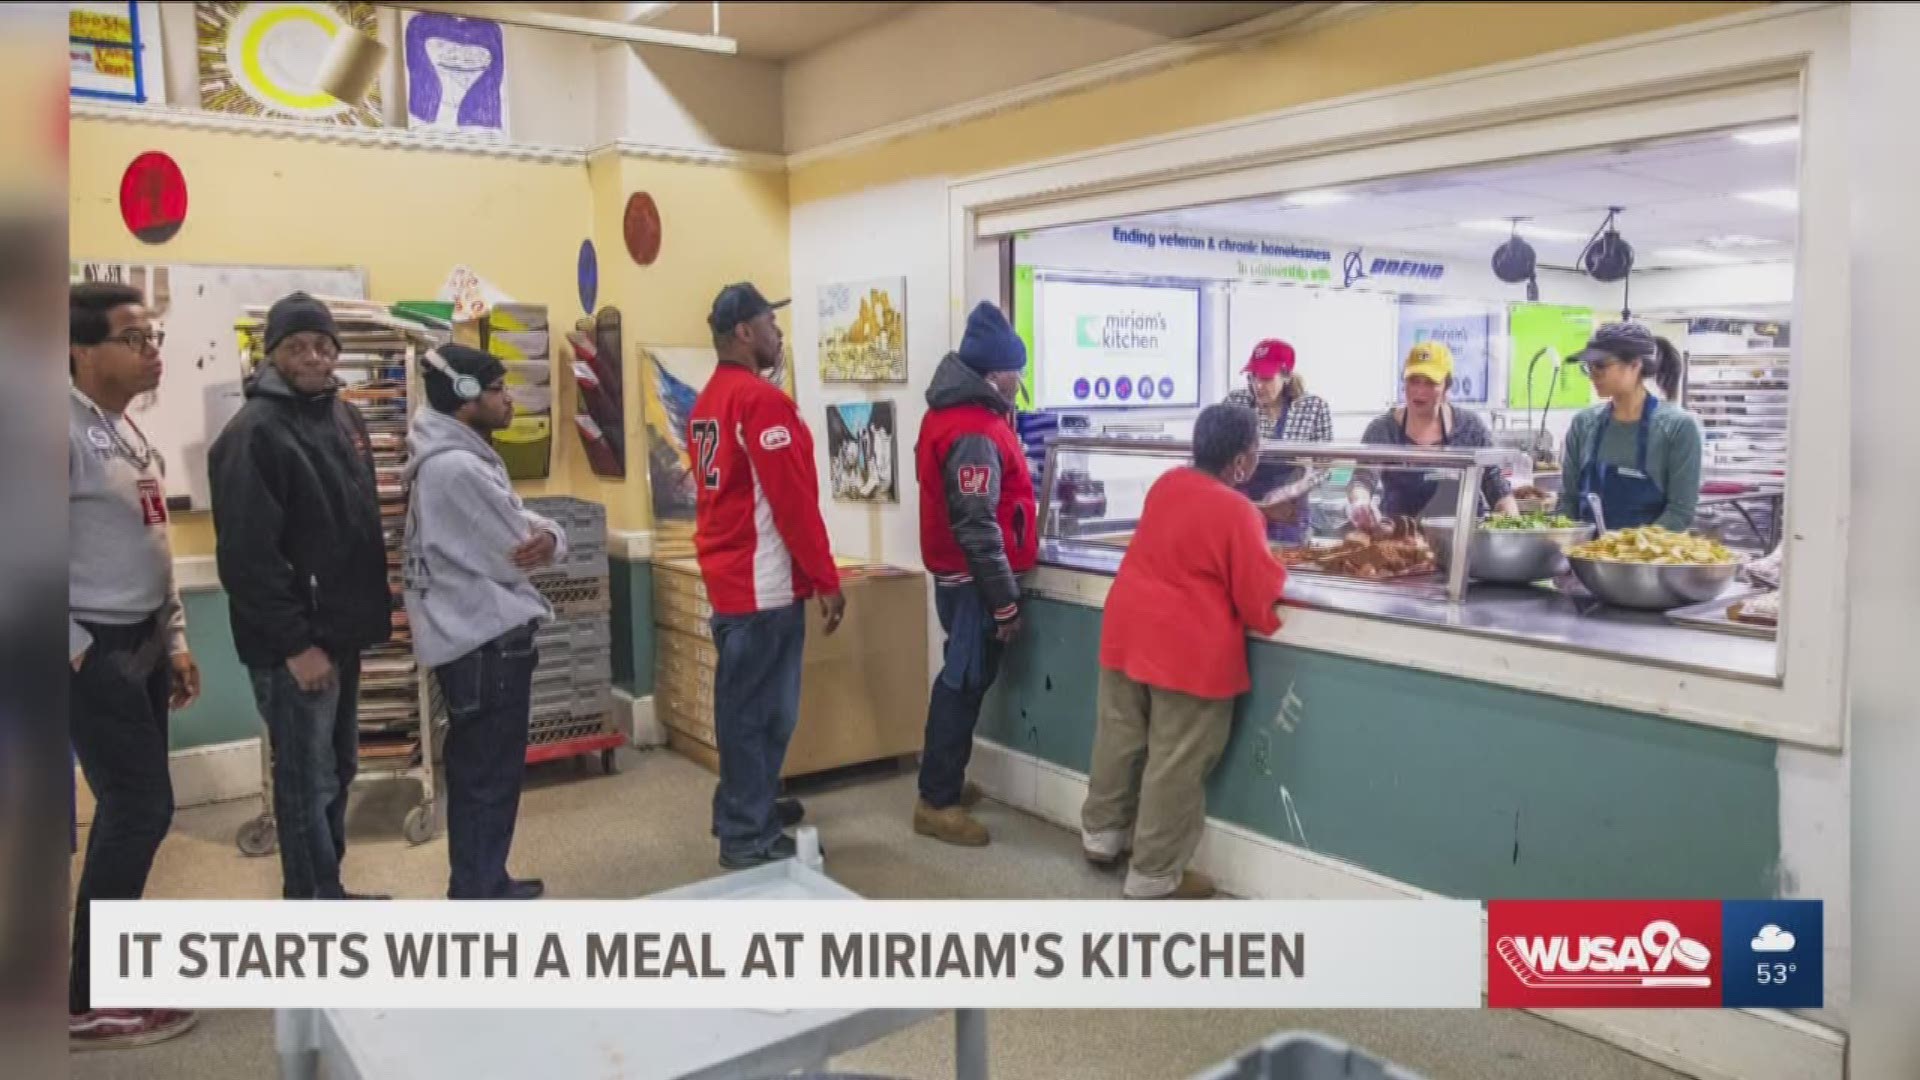 Miriam's Kitchen hopes by serving delicious food, like this shrimp and grits recipe prepared by Chef Cheryl Bell, they will then be able to offer their guests social services to help find them permanent homes.